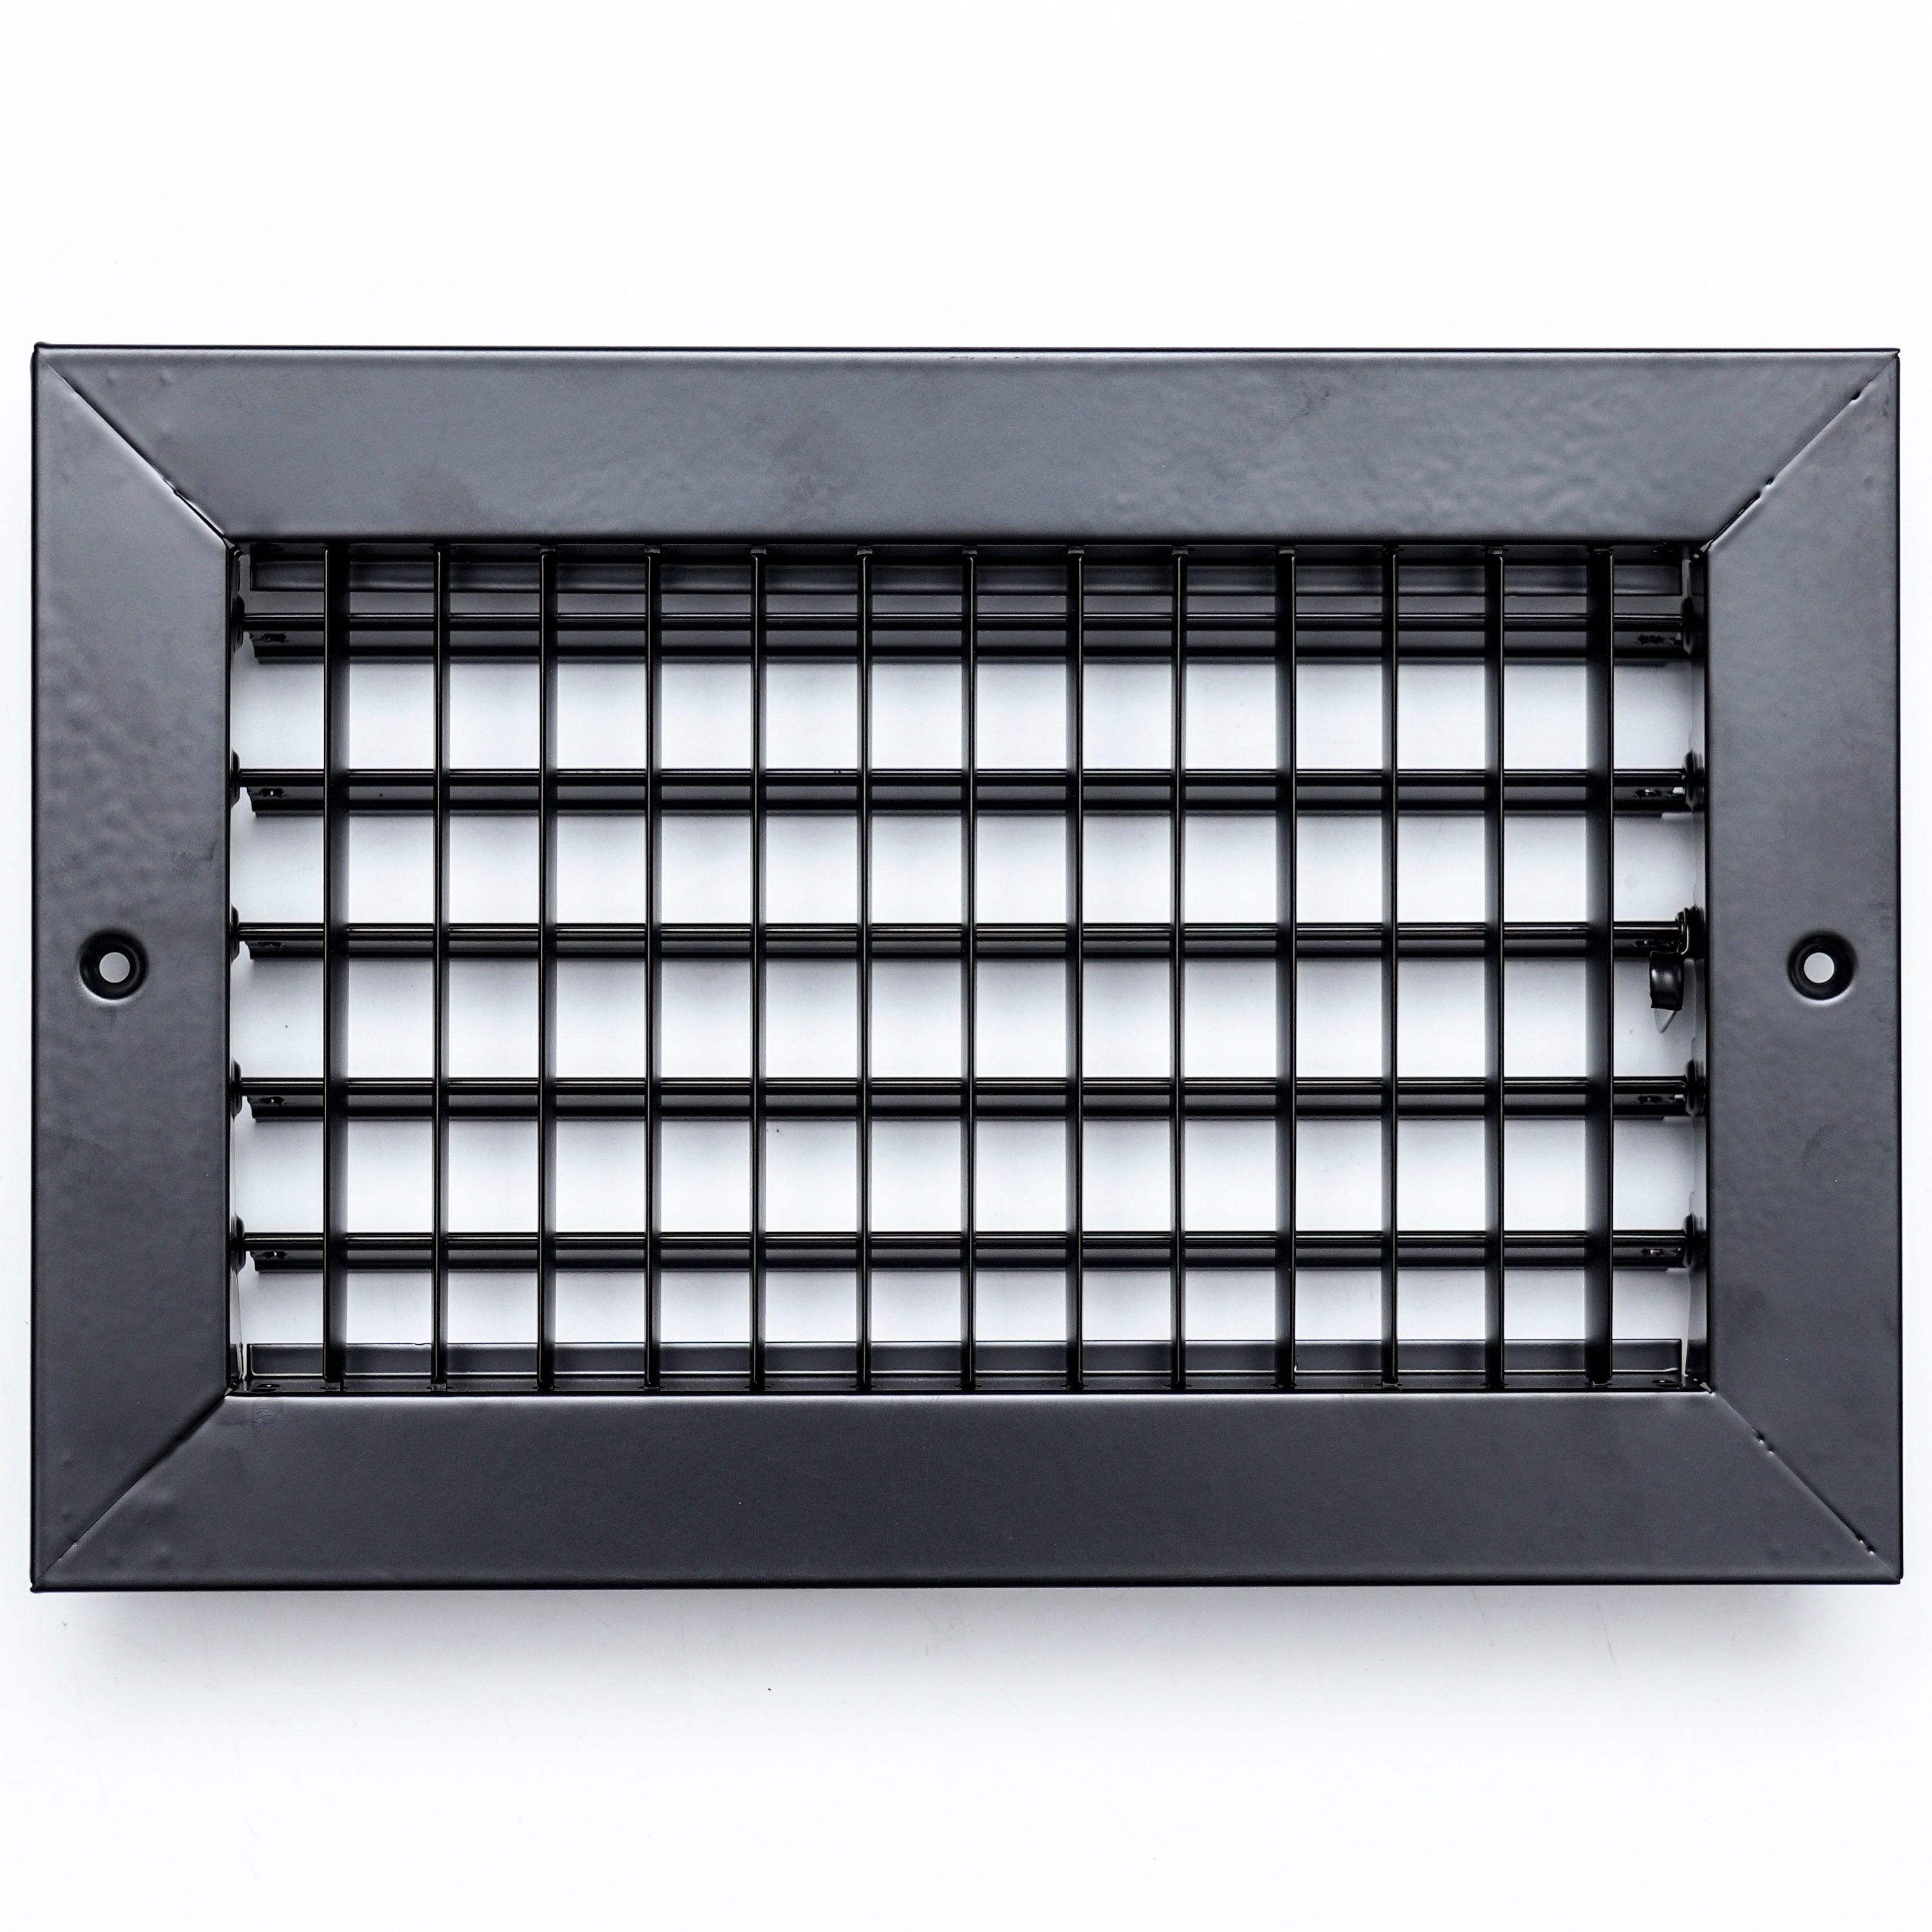 airgrilles 10"w x 6"h steel adjustable air supply grille  -  register vent cover grill for sidewall and ceiling  -  black  -  outer dimensions: 11.75"w x 7.75"h for 10x6 duct opening hnd-adj-bl-10x6  - 1